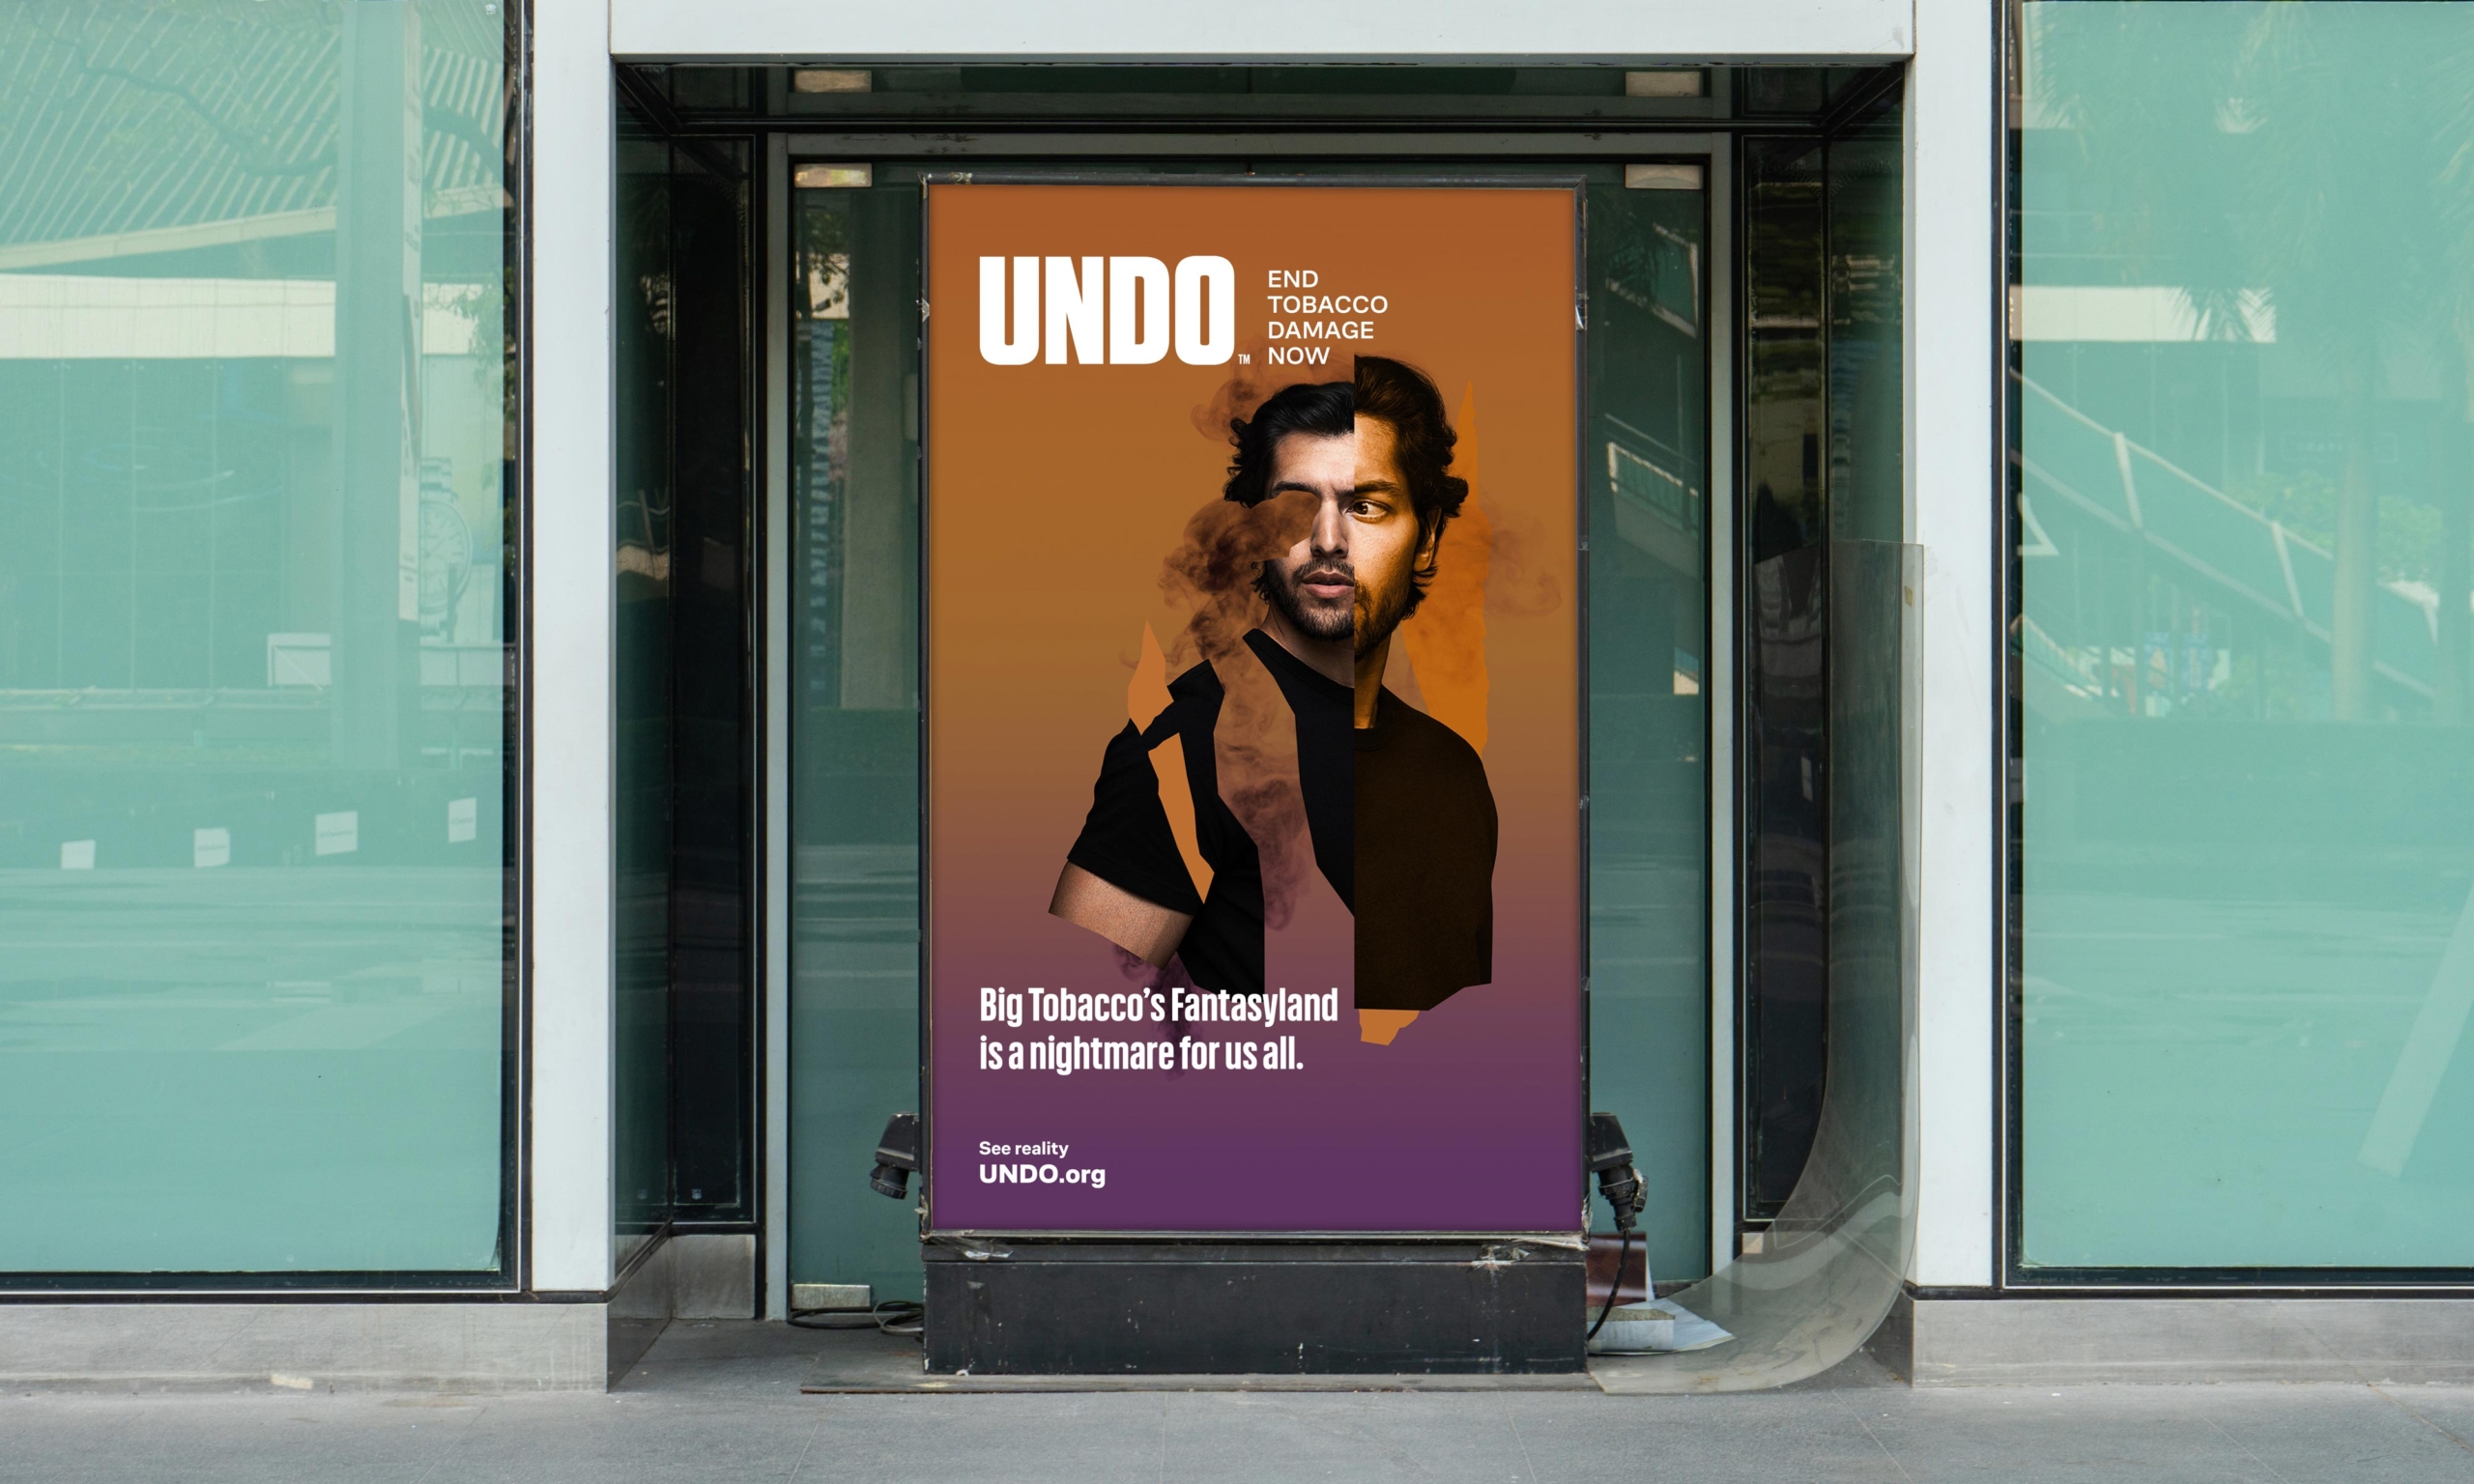 A bus shelter billboard in dark orange and purple shows a fractured collage portrait of a person trying to quit nicotine. The headline reads, “Undo. End Tobacco Damage Now. Big Tobacco’s Fantasy;and is a nightmare for us all. See Reality. Undo dot org.”